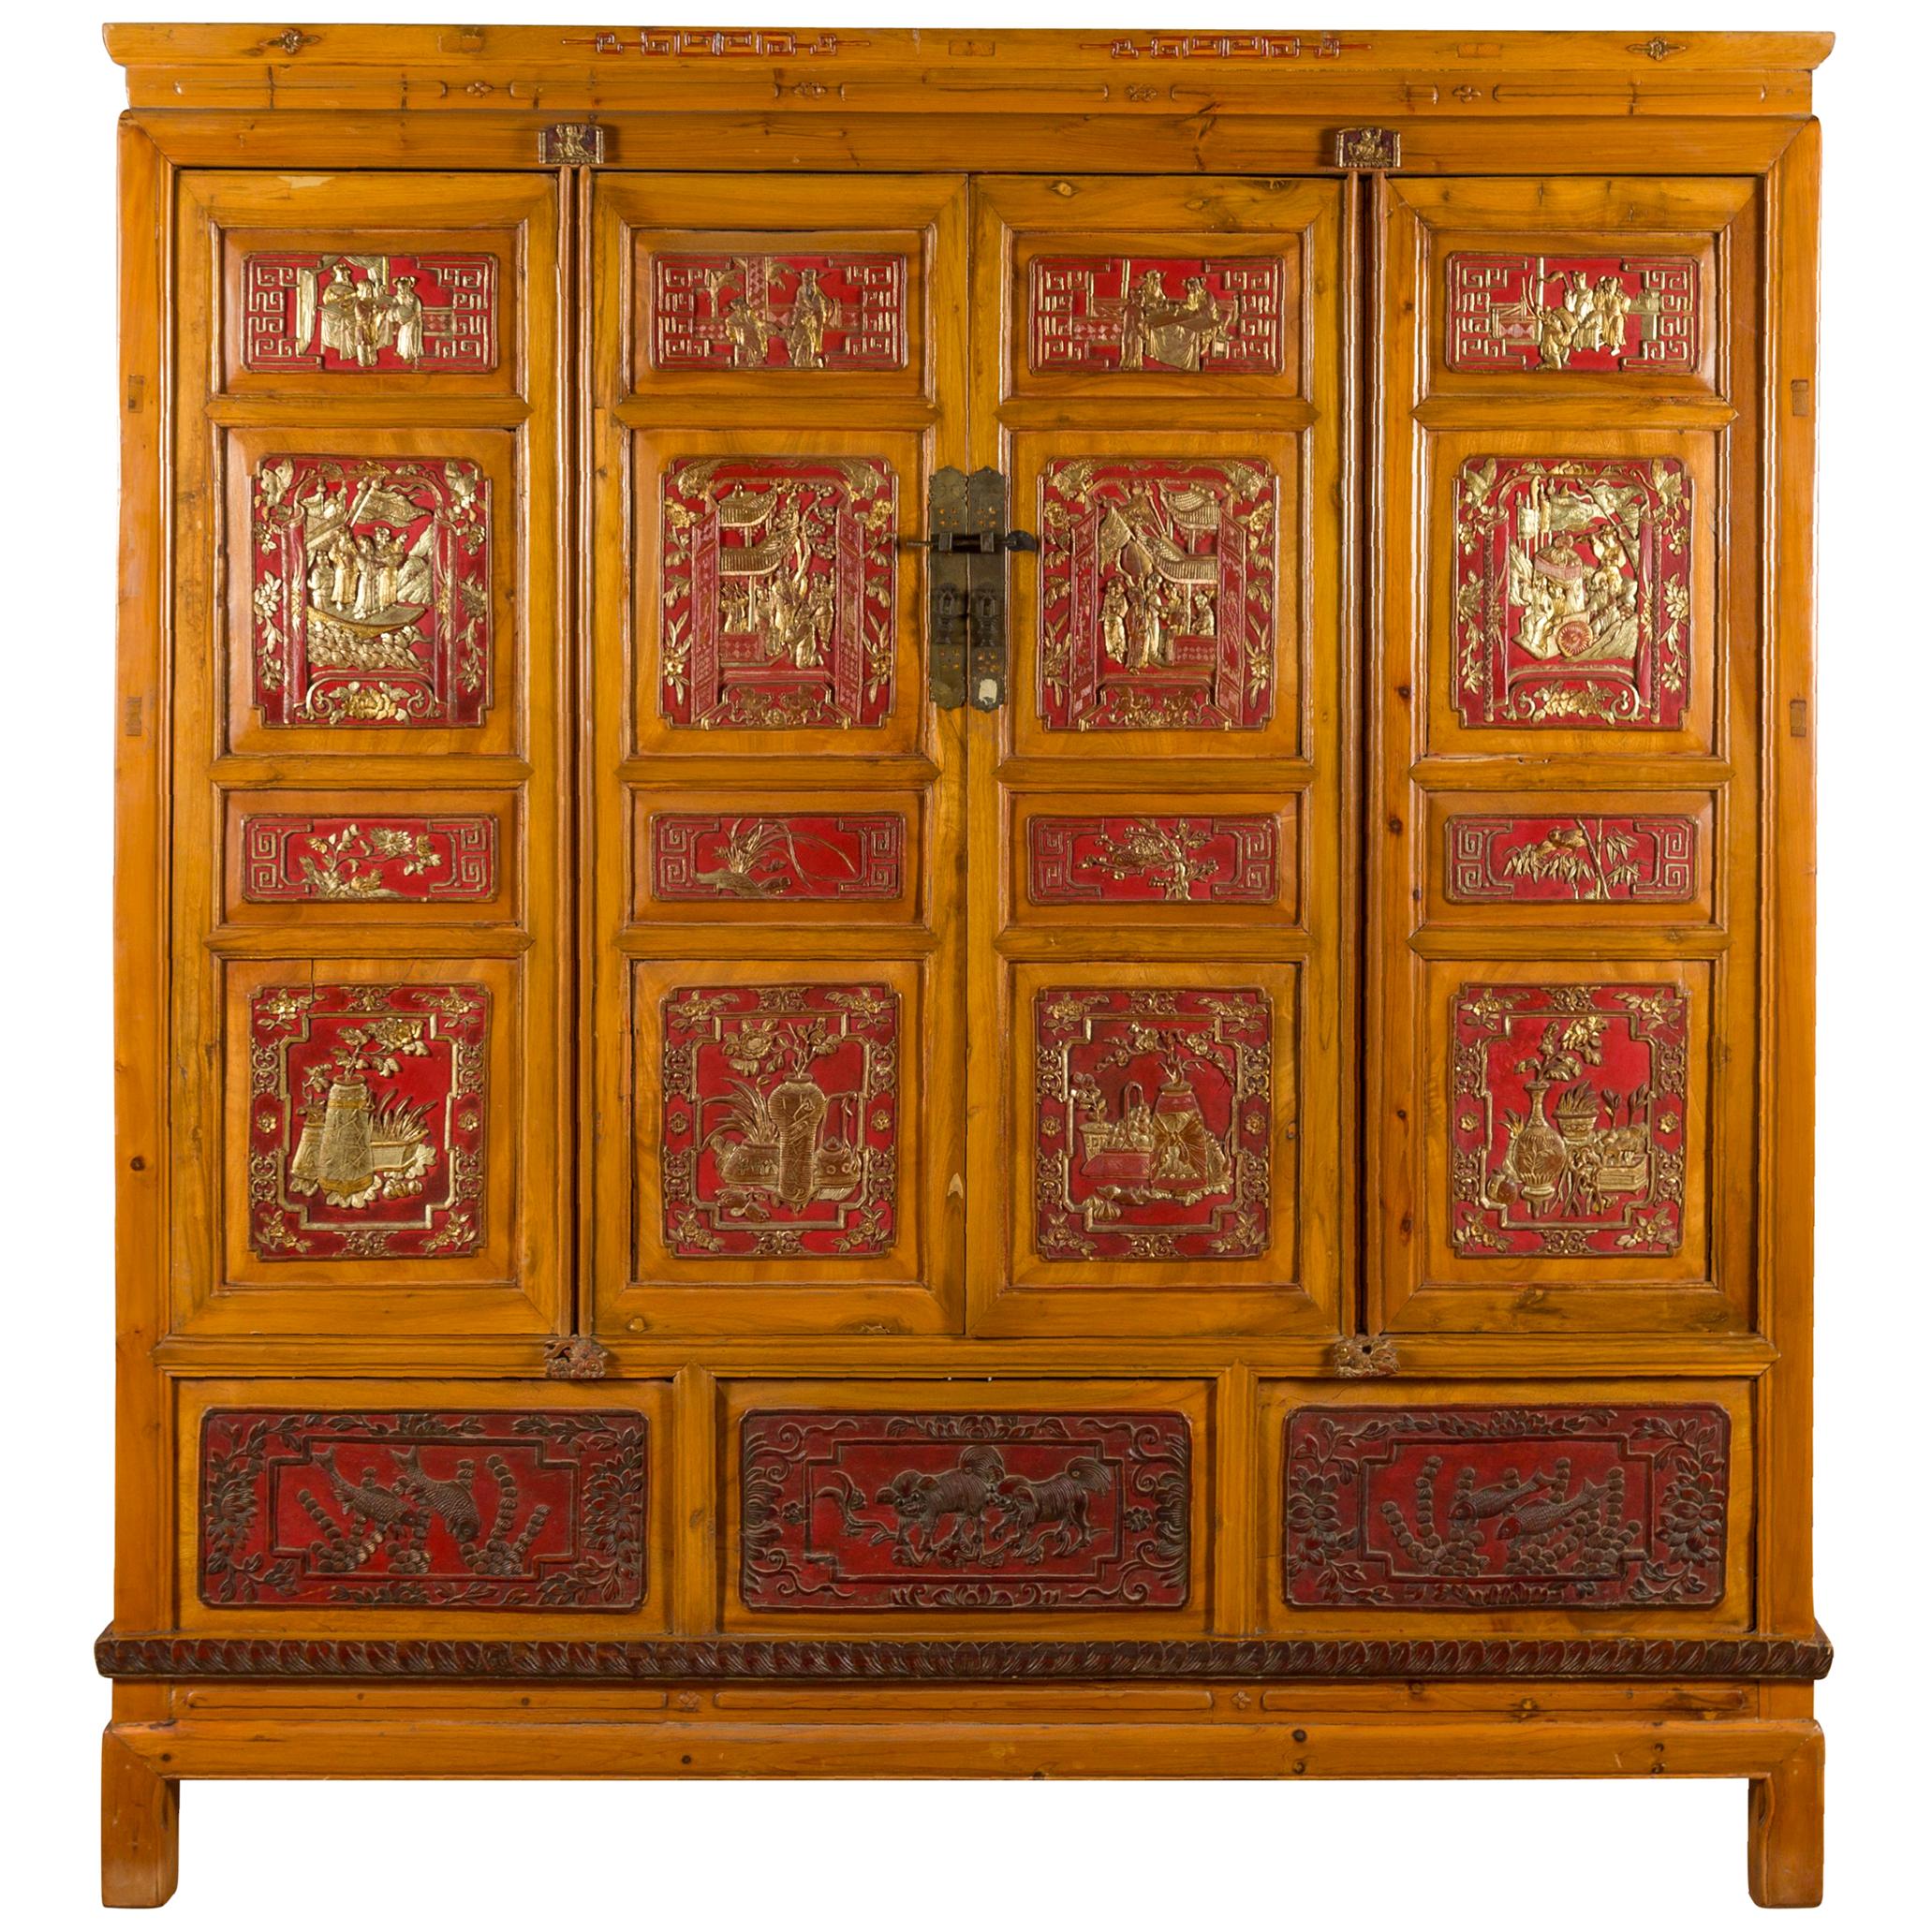 Qing Dynasty 19th Century Chinese Hand Carved Armoire with Gilt Painted Panels